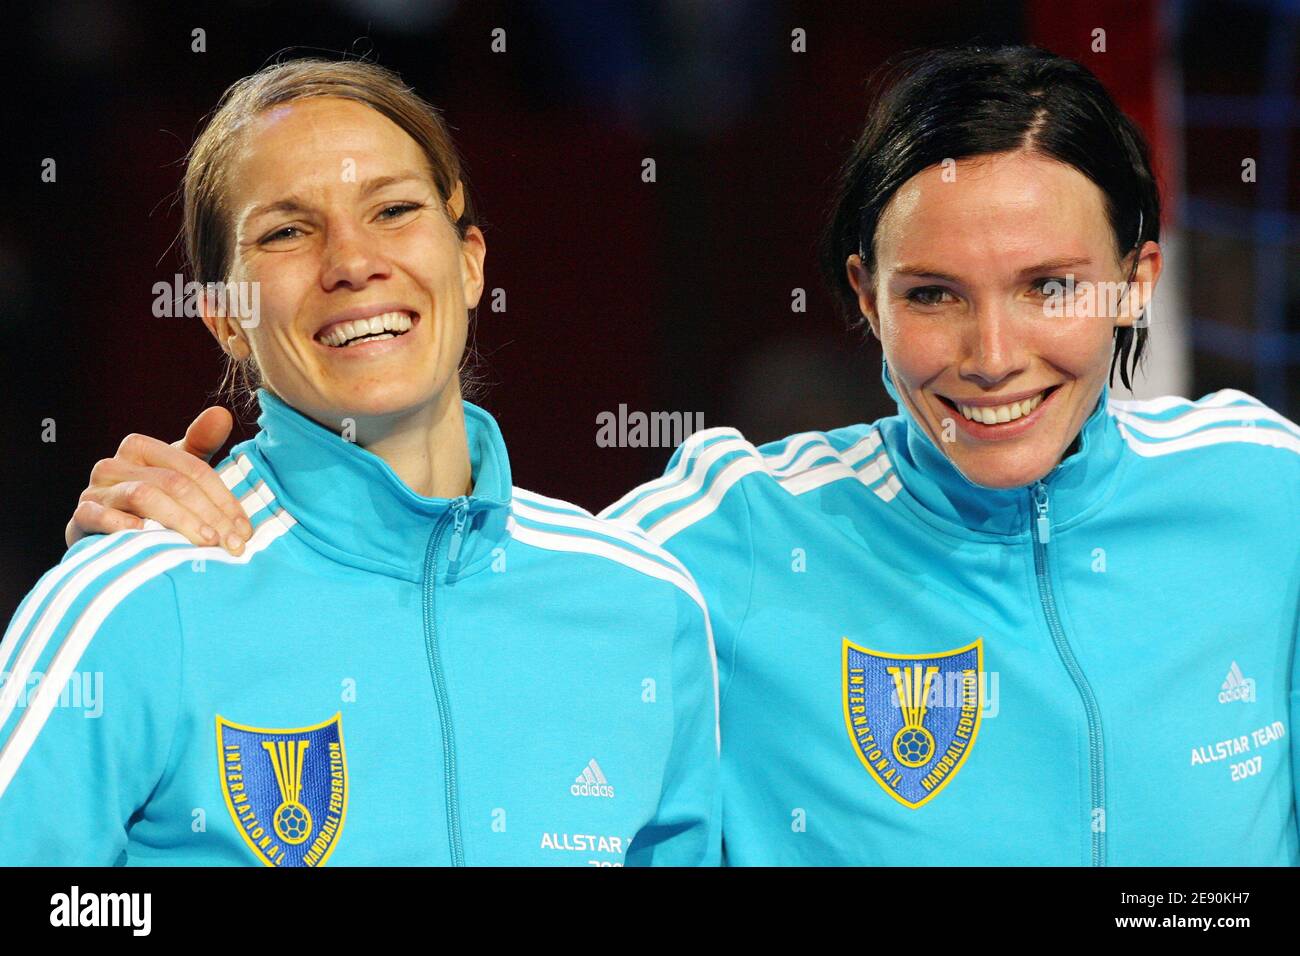 Norway's Gro Hammerseng and Katja Nyberg during the Women's World Handball Championship Final match, Norway vs Russia at the Palais Omnisports de Bercy in Paris, France on December 16, 2007. Russia won 29-24. Photo by Mehdi Taamallah/Cameleon/ABACAPRESS.COM Stock Photo